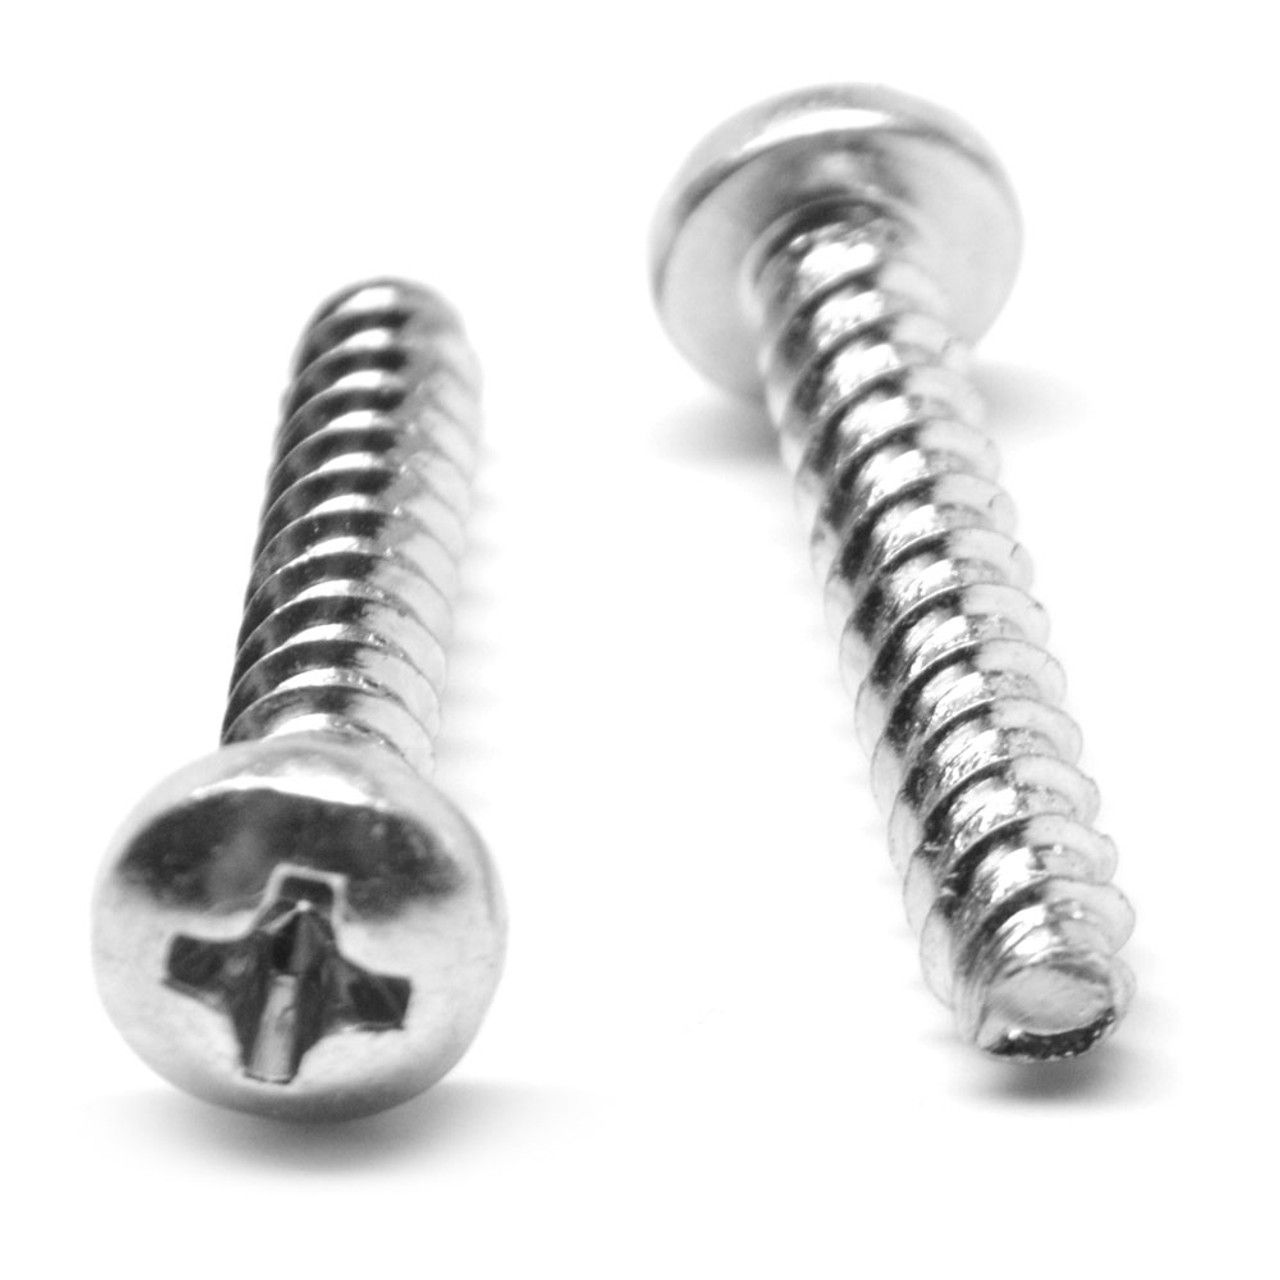 M3 x 1.34 x 6 MM EJOT PT-Alternative Phillips Pan Head Thread Forming Screw Stainless Steel 18-8